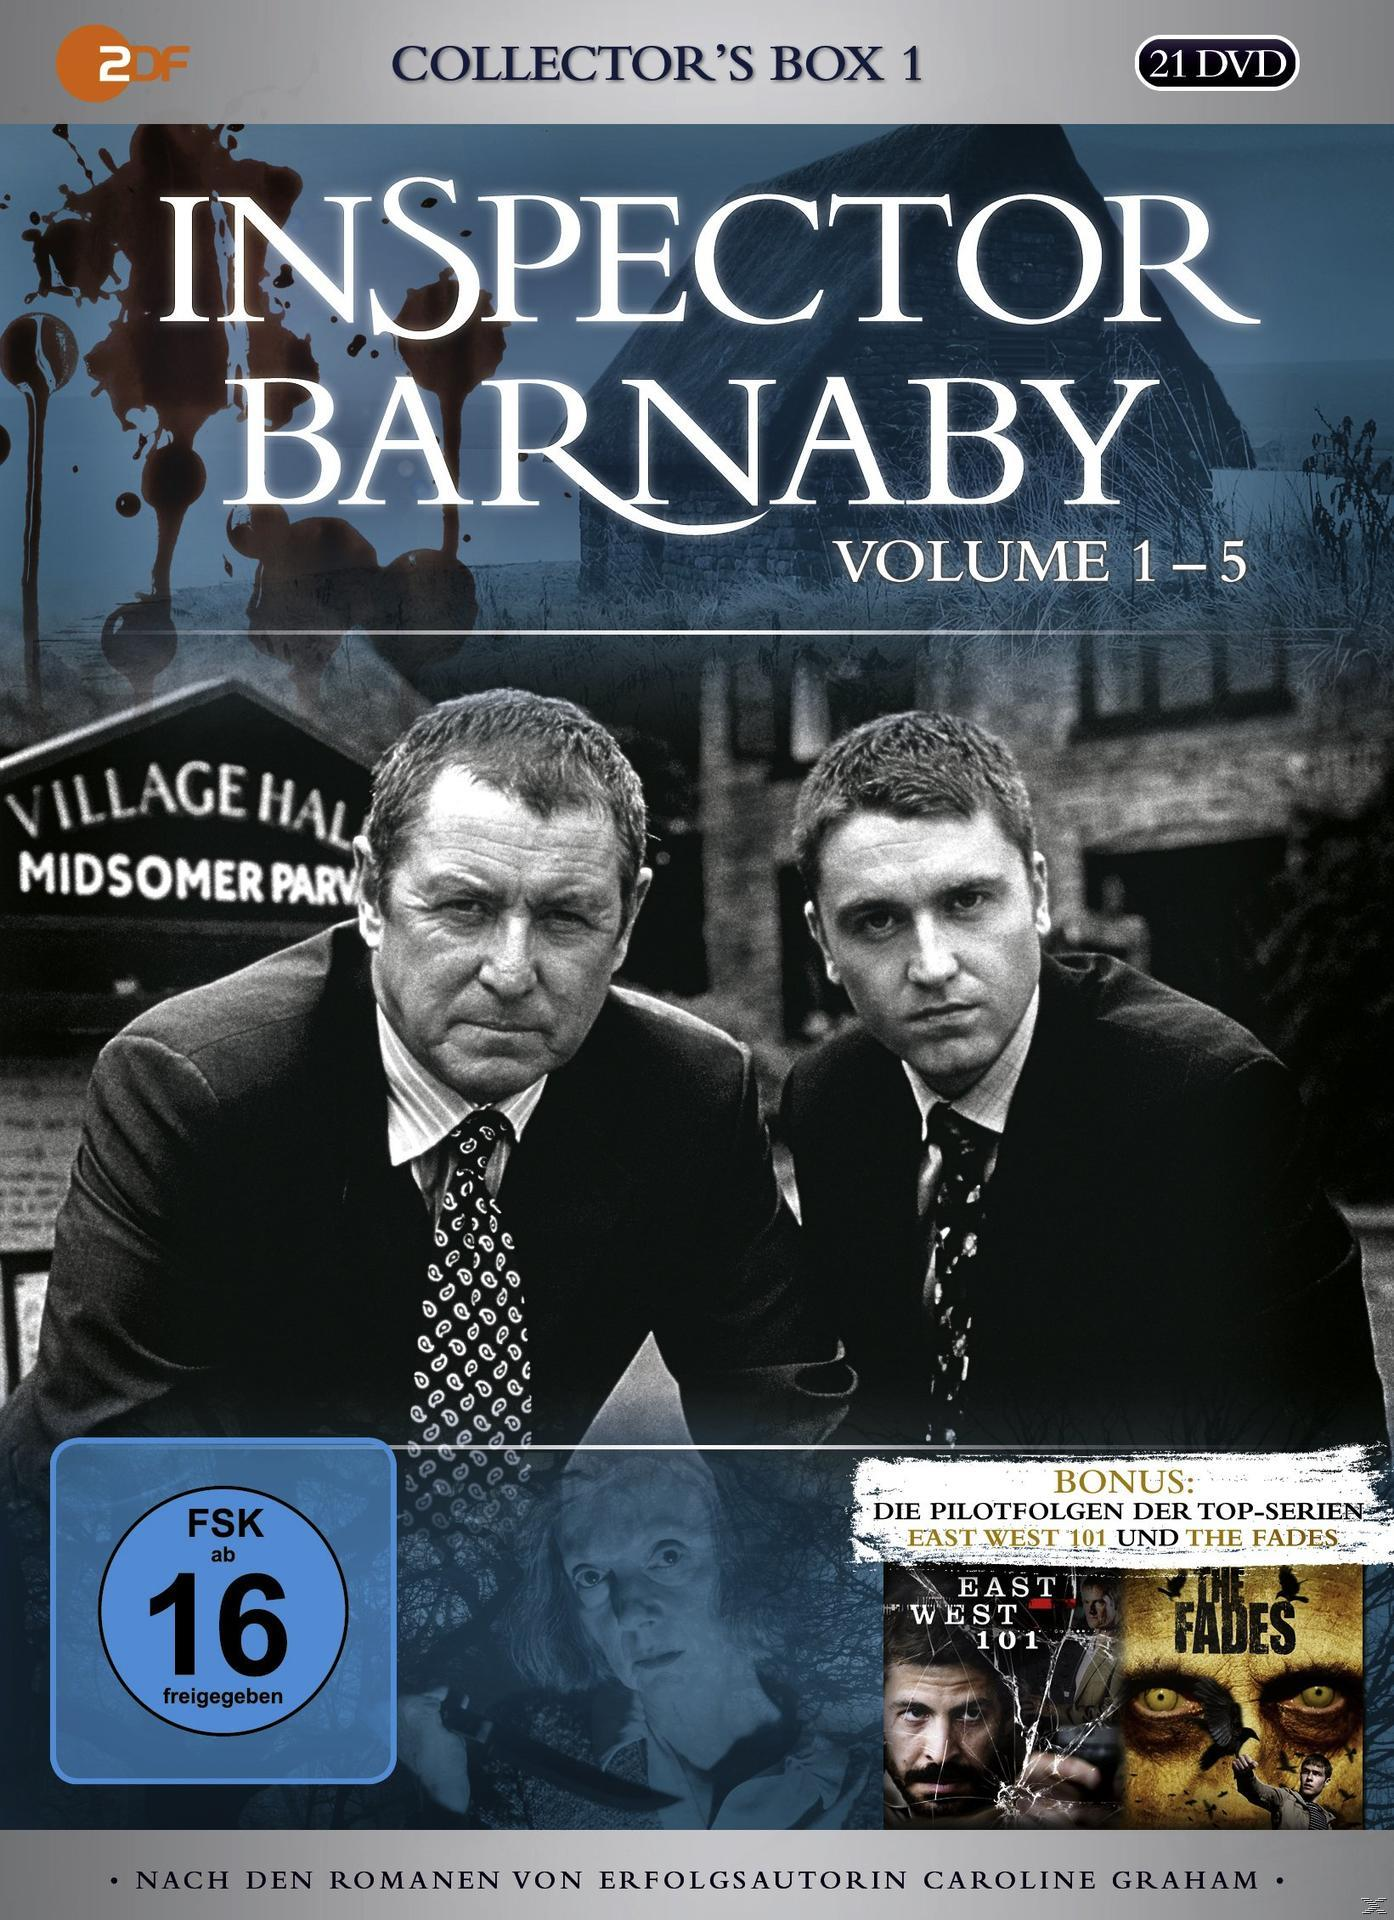 1 Inspector (Folge 1-5) Box DVD Barnaby: Collector’s